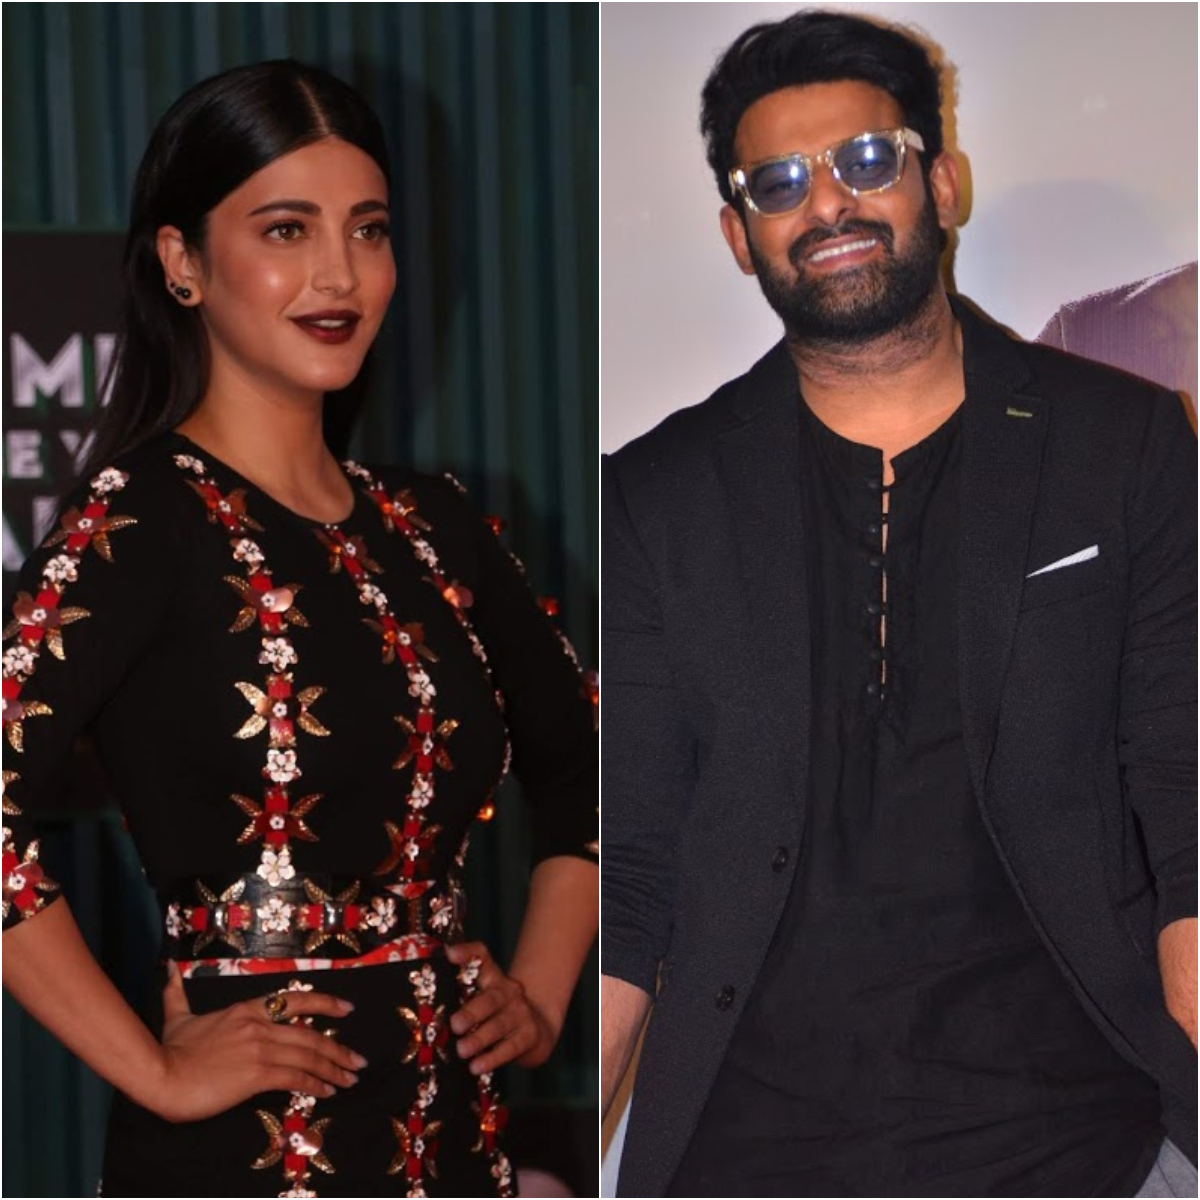 EXCLUSIVE: Shruti Haasan on working with Prabhas in Salaar: He is genuinely chilled out & positive as a person